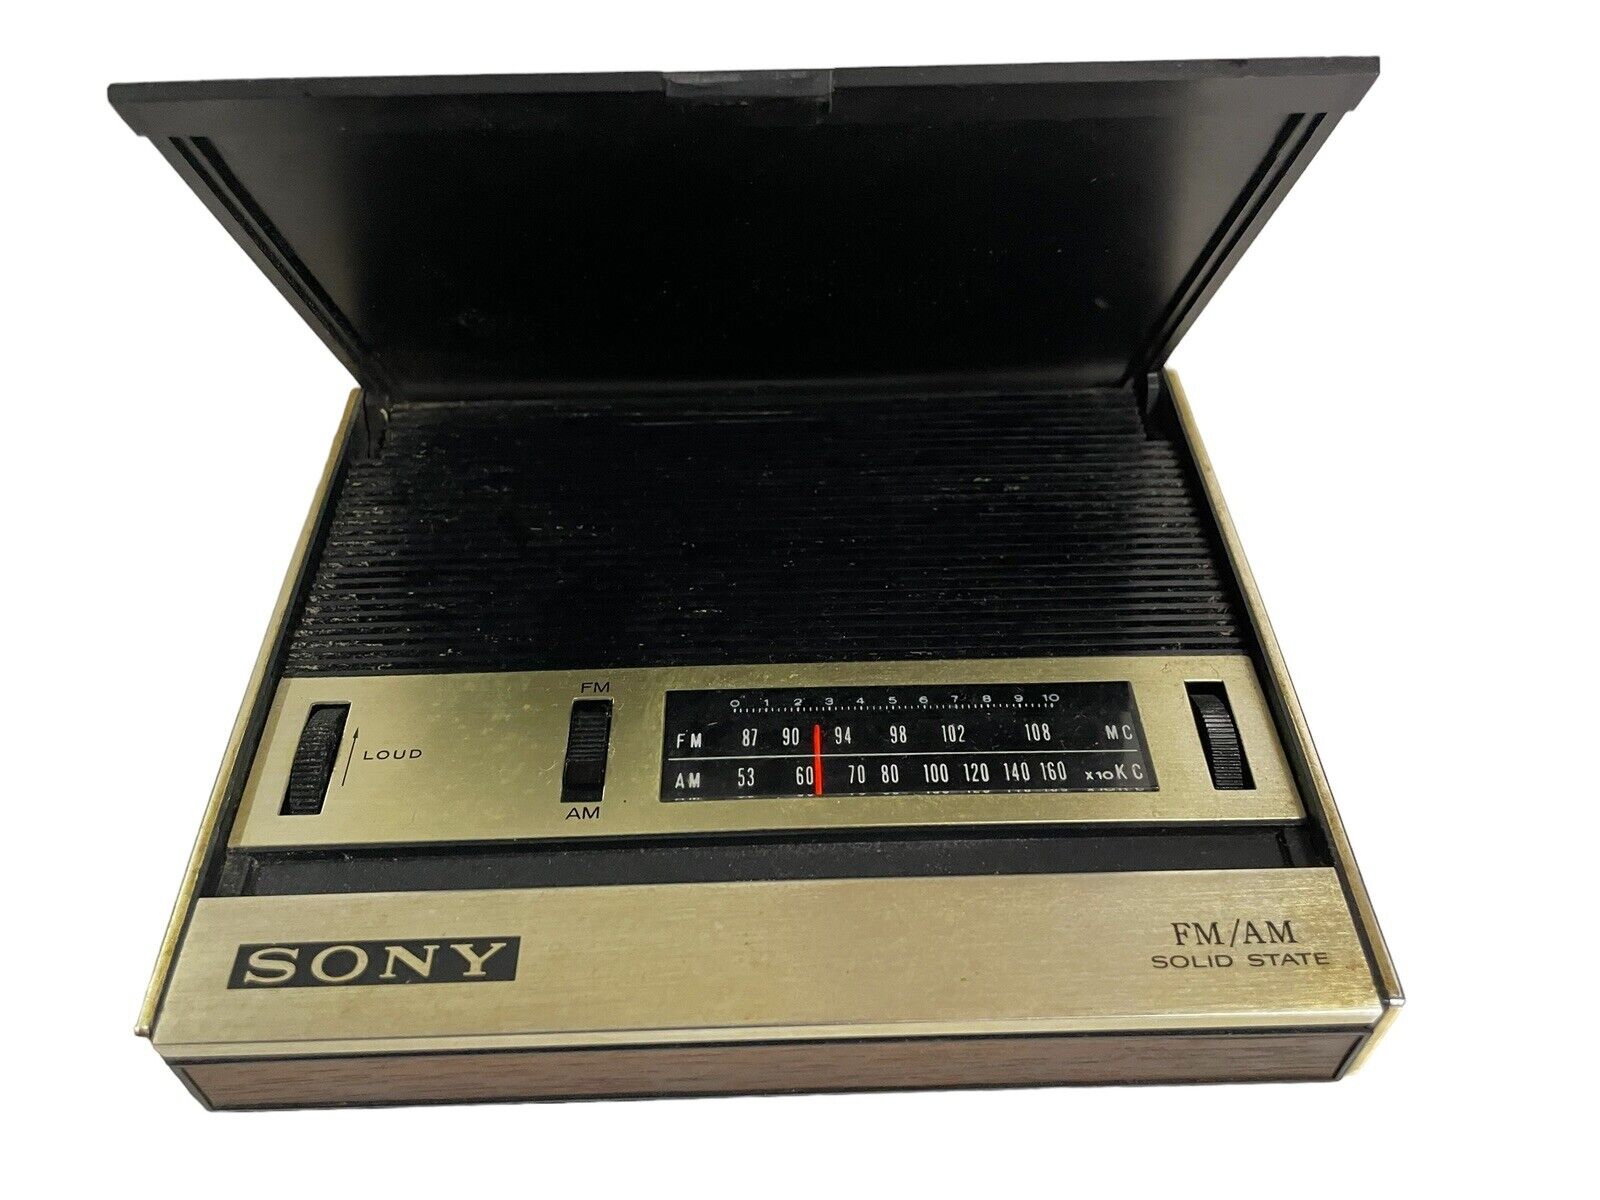 Vintage Sony Corp FM/AM TFM-1849W Portable Radio Made in Tokyo Japan